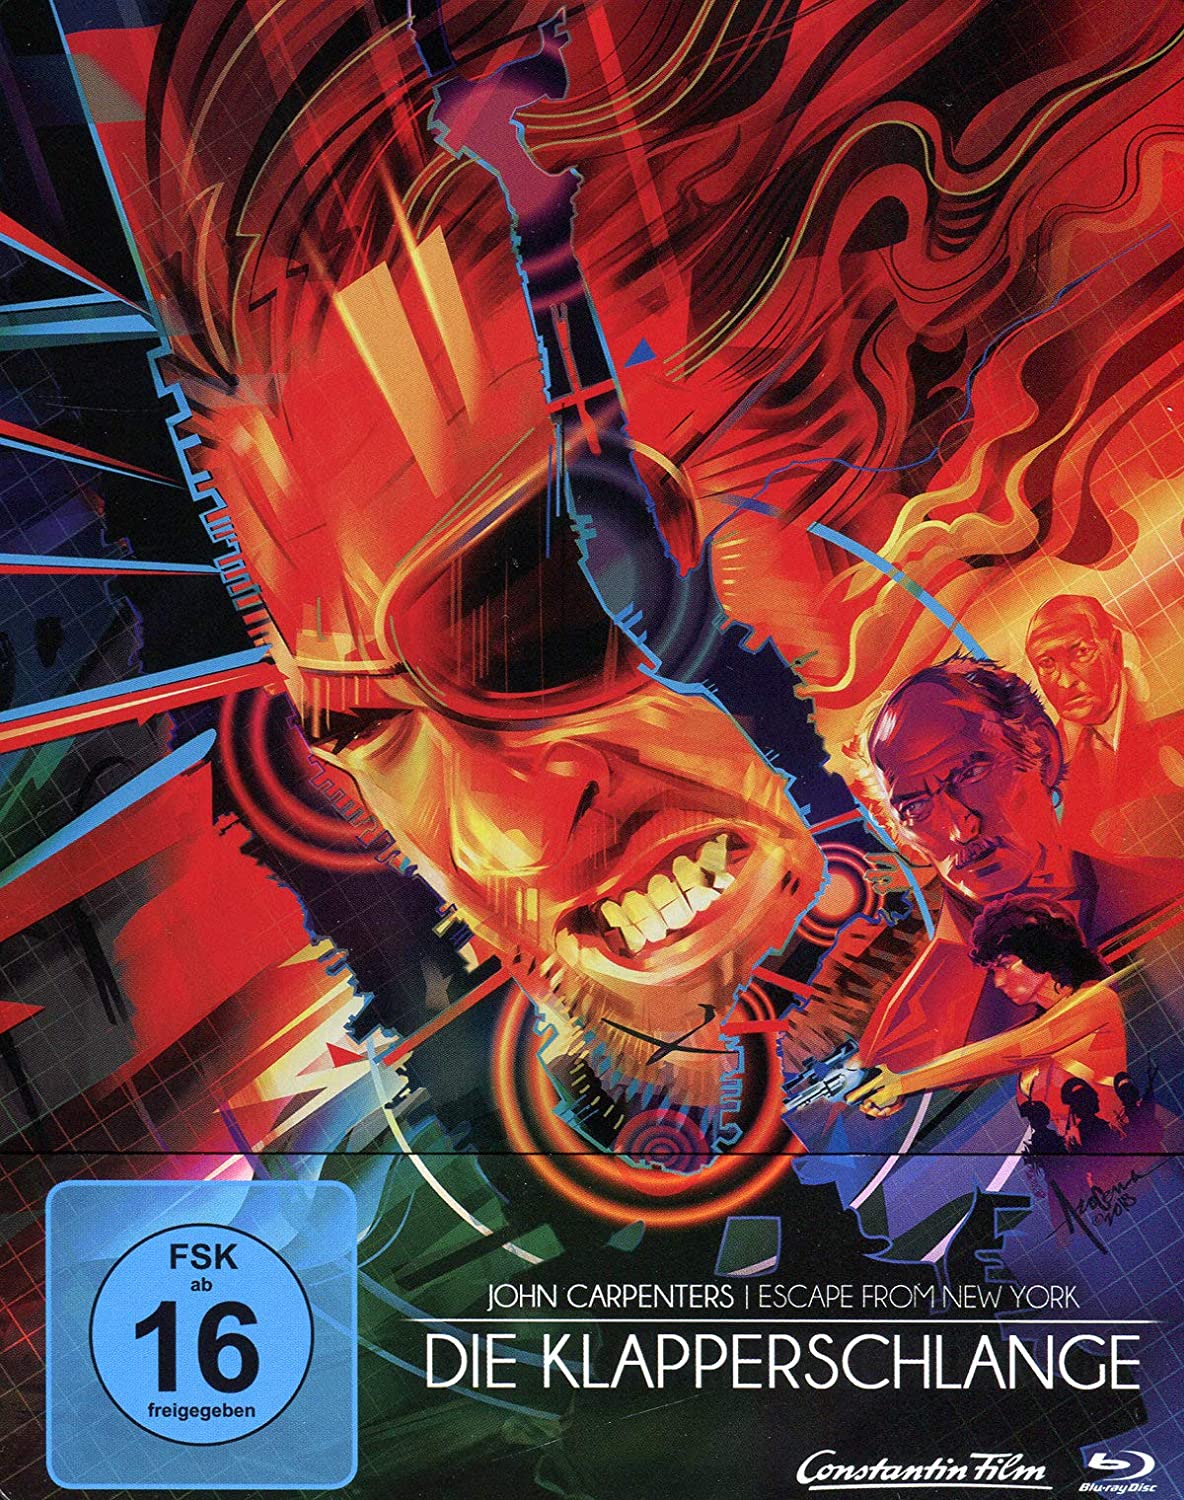 German release of Escape from New York